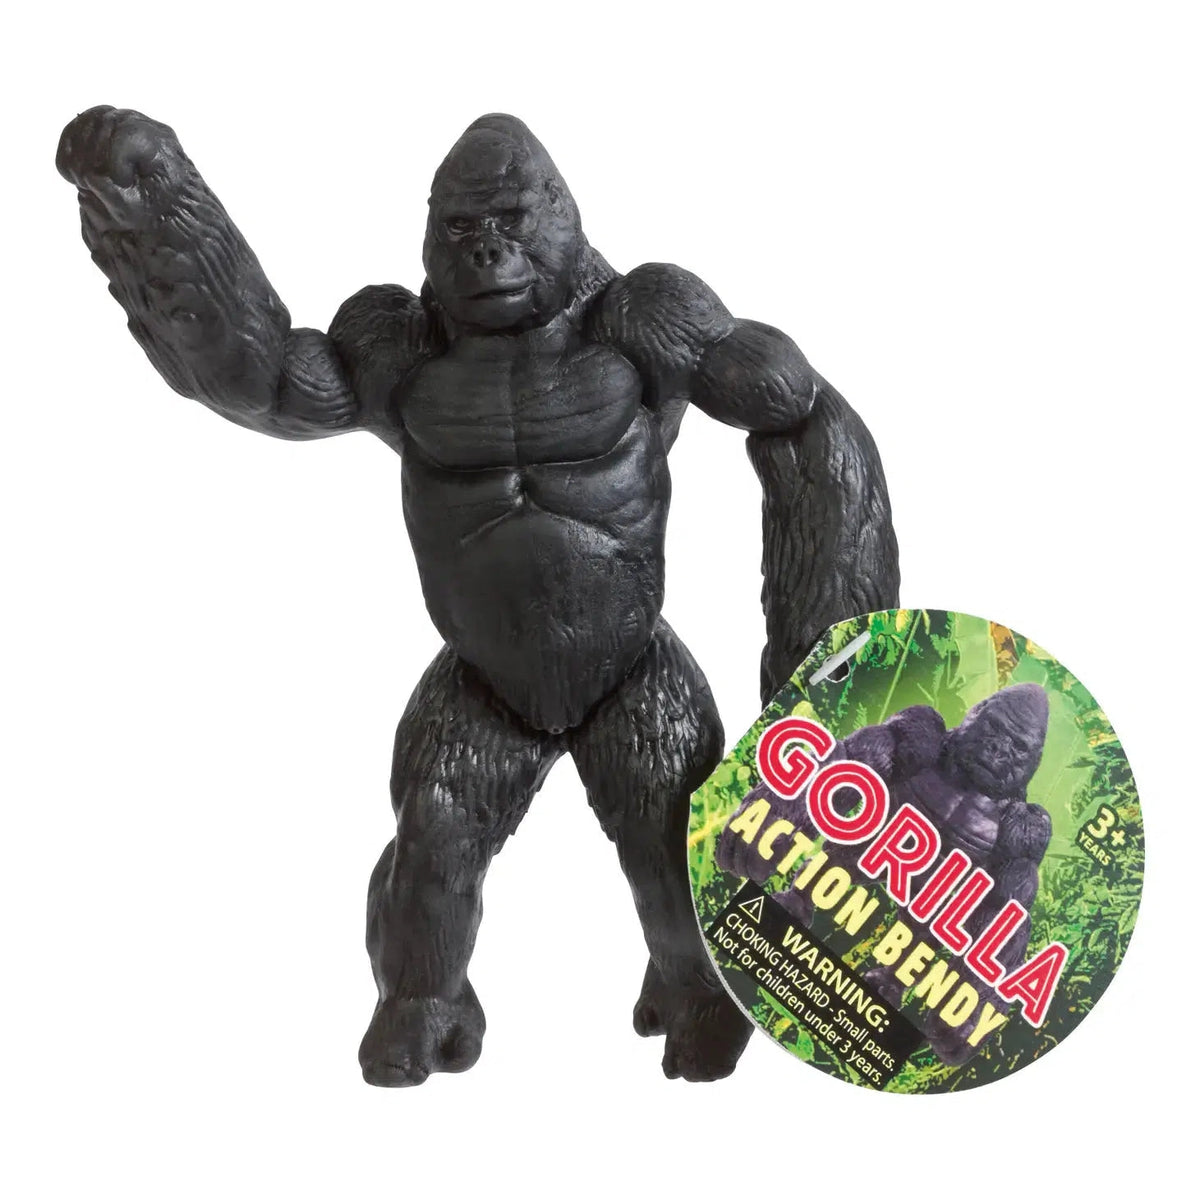 Front view of the Bendy Gorilla with one arm raised.